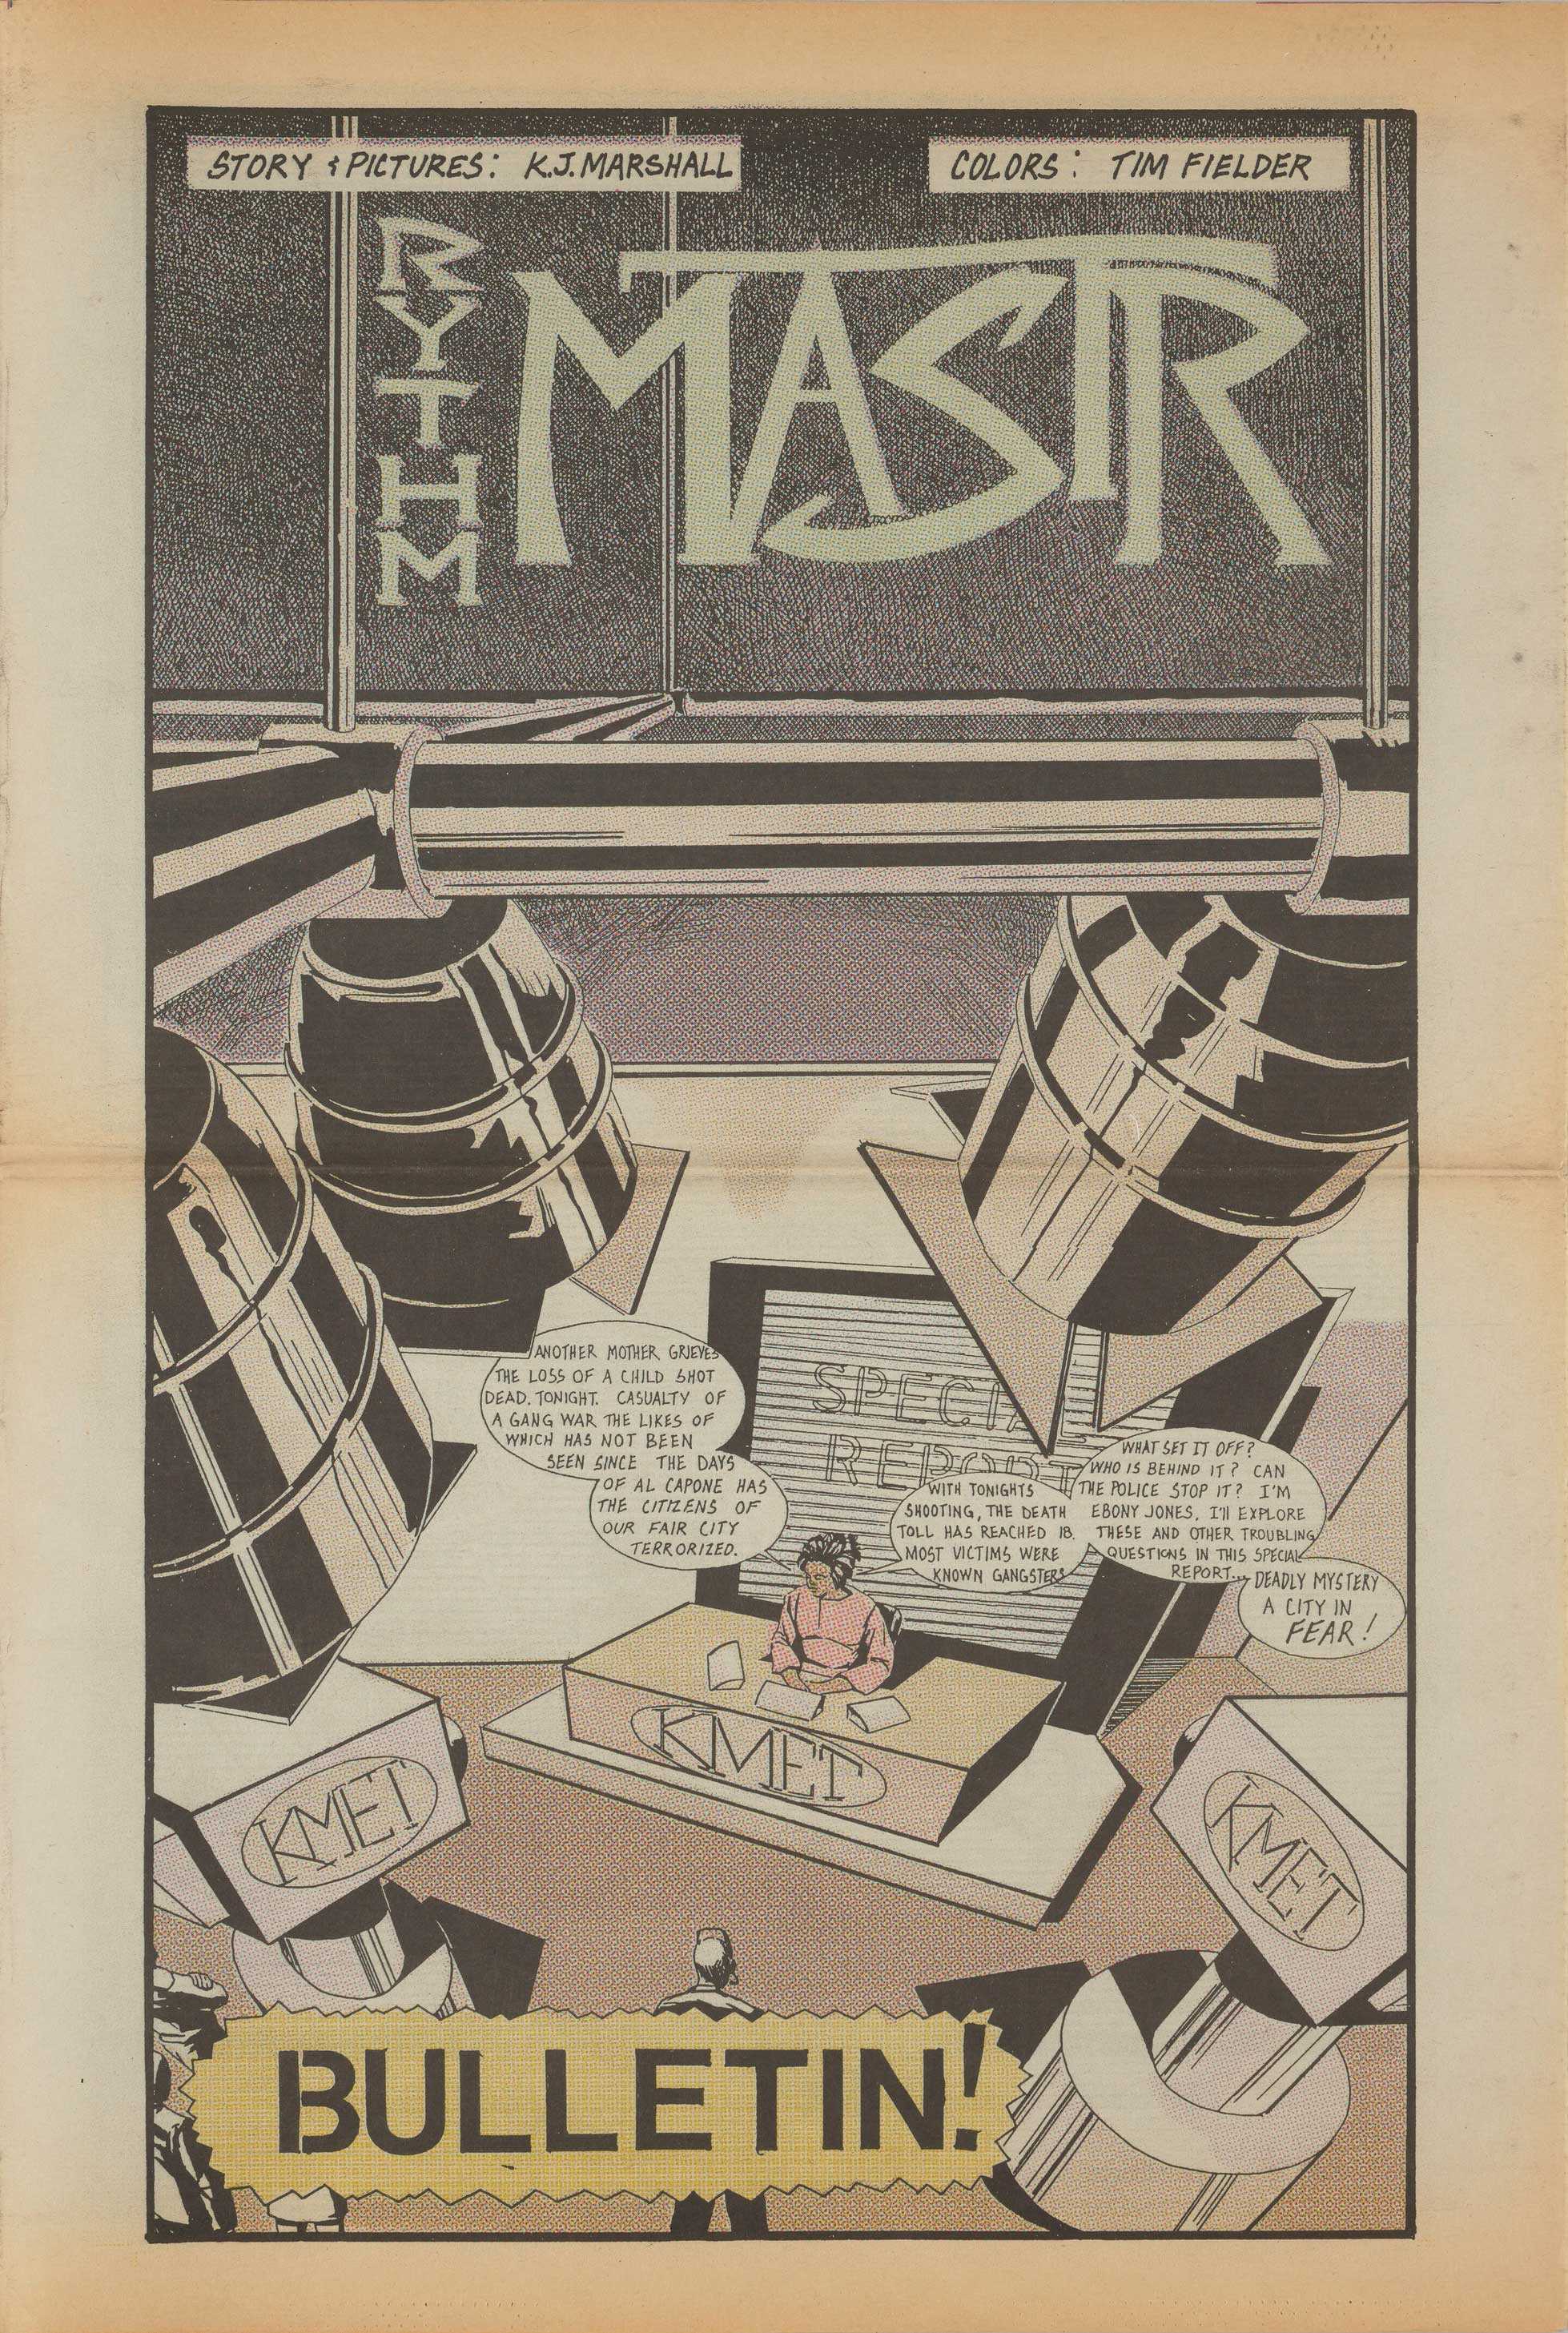 The cover of Rythm Mastr: Bulletin! has a scene of a soundstage with a woman in a pink dress broadcastings the news.